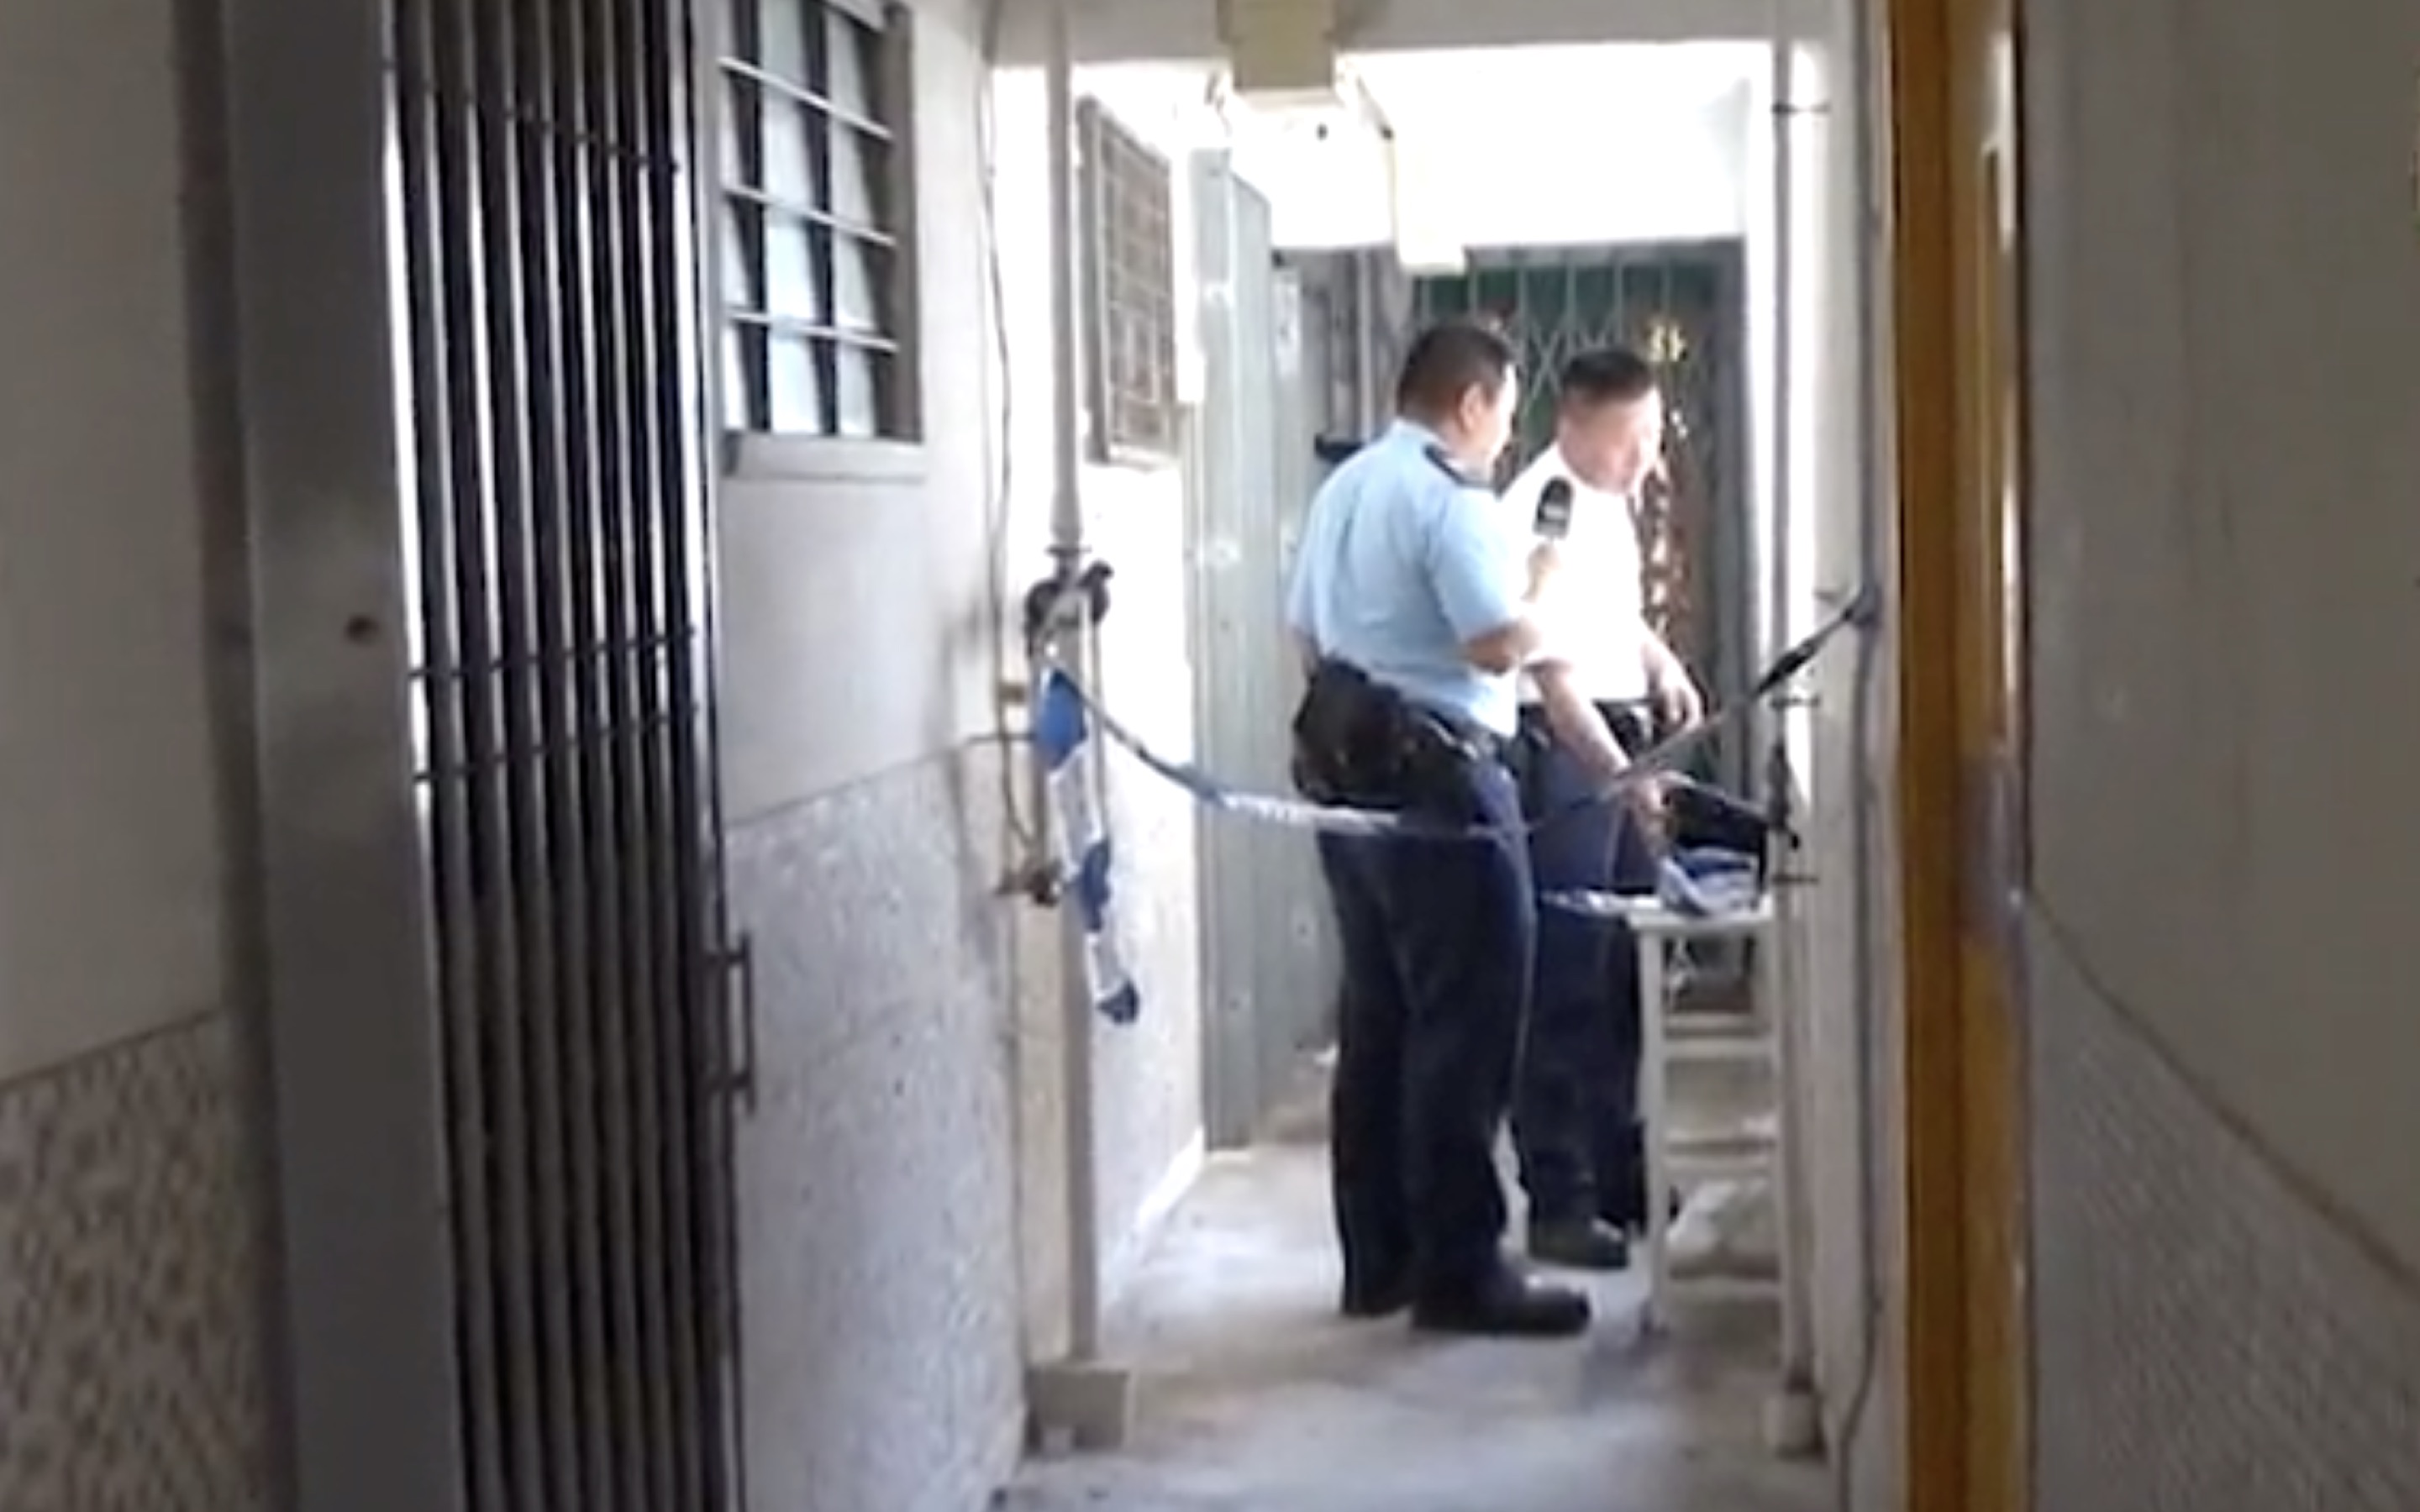 Police cordon off the apartment where a woman reportedly ran away from her boyfriend after he poured kerosene over her and threatened to burn her alive. Screengrab via Apple Daily video.